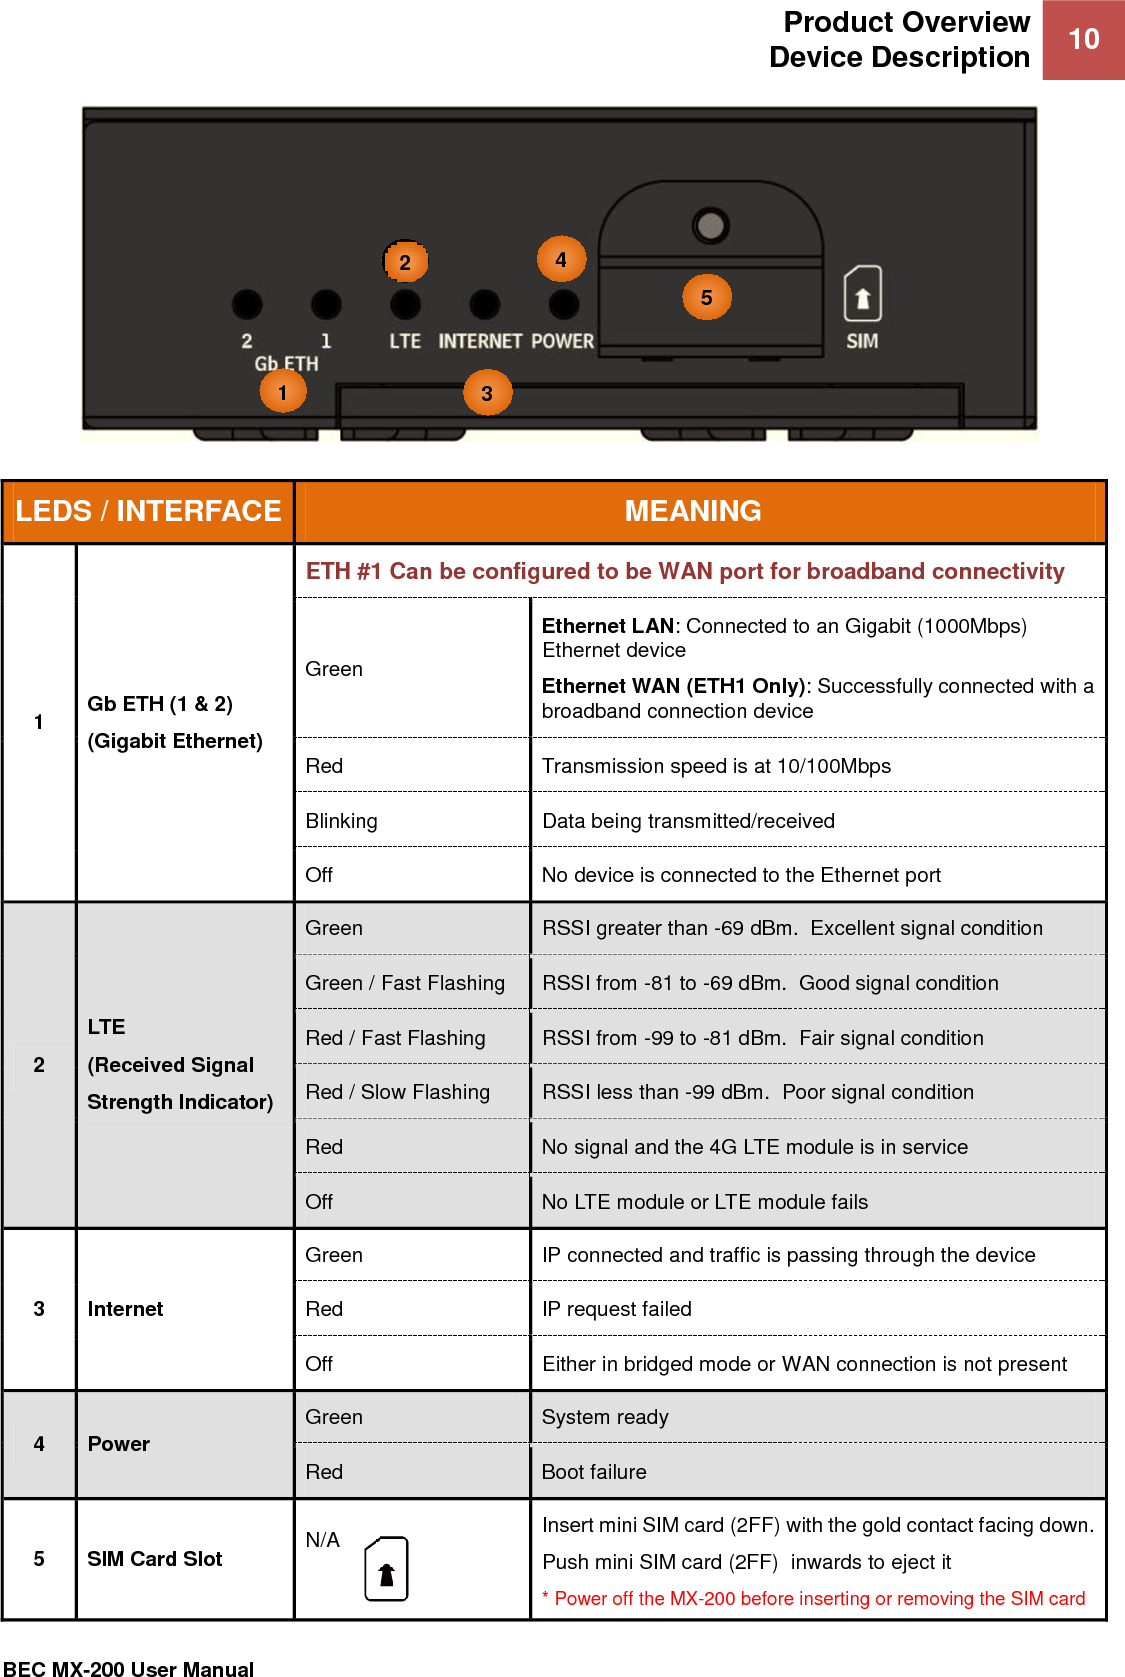 Product Overview Device Description 10   BEC MX-200 User Manual   LEDS / INTERFACE MEANING 1 Gb ETH (1 &amp; 2) (Gigabit Ethernet) ETH #1 Can be configured to be WAN port for broadband connectivity Green Ethernet LAN: Connected to an Gigabit (1000Mbps) Ethernet device Ethernet WAN (ETH1 Only): Successfully connected with a broadband connection device Red Transmission speed is at 10/100Mbps Blinking Data being transmitted/received Off No device is connected to the Ethernet port 2 LTE (Received Signal  Strength Indicator) Green RSSI greater than -69 dBm.  Excellent signal condition Green / Fast Flashing  RSSI from -81 to -69 dBm.  Good signal condition Red / Fast Flashing  RSSI from -99 to -81 dBm.  Fair signal condition Red / Slow Flashing RSSI less than -99 dBm.  Poor signal condition Red No signal and the 4G LTE module is in service Off No LTE module or LTE module fails 3  Internet Green IP connected and traffic is passing through the device Red IP request failed Off Either in bridged mode or WAN connection is not present 4 Power Green System ready Red Boot failure 5 SIM Card Slot N/A Insert mini SIM card (2FF) with the gold contact facing down.  Push mini SIM card (2FF)  inwards to eject it * Power off the MX-200 before inserting or removing the SIM card 10 1 21 31 41 51 